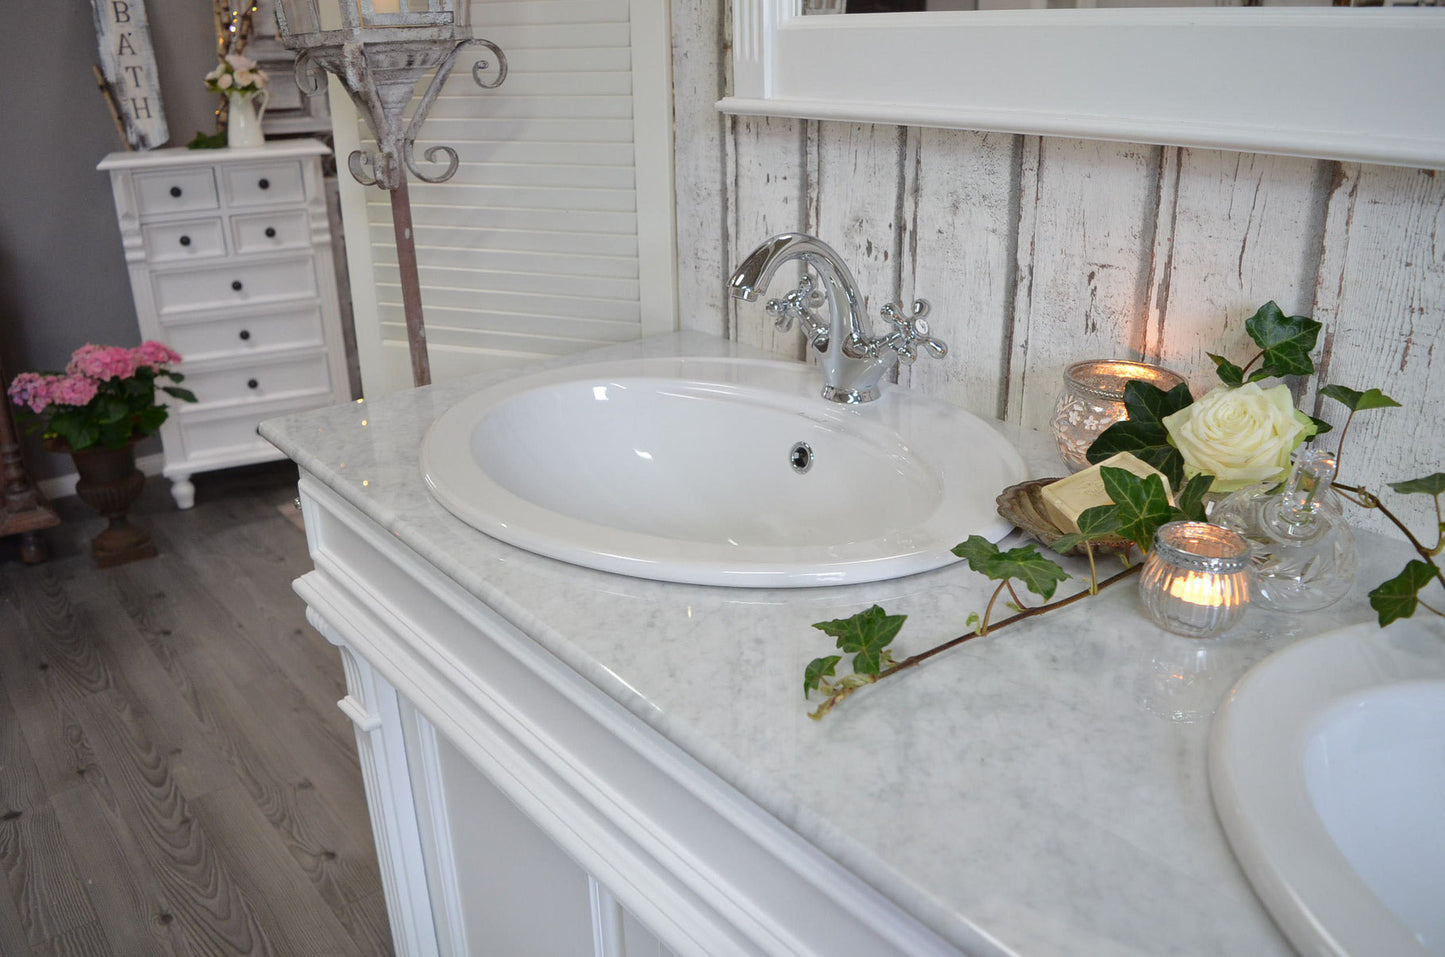 "Aurélie" white country house double washbasin with marble top